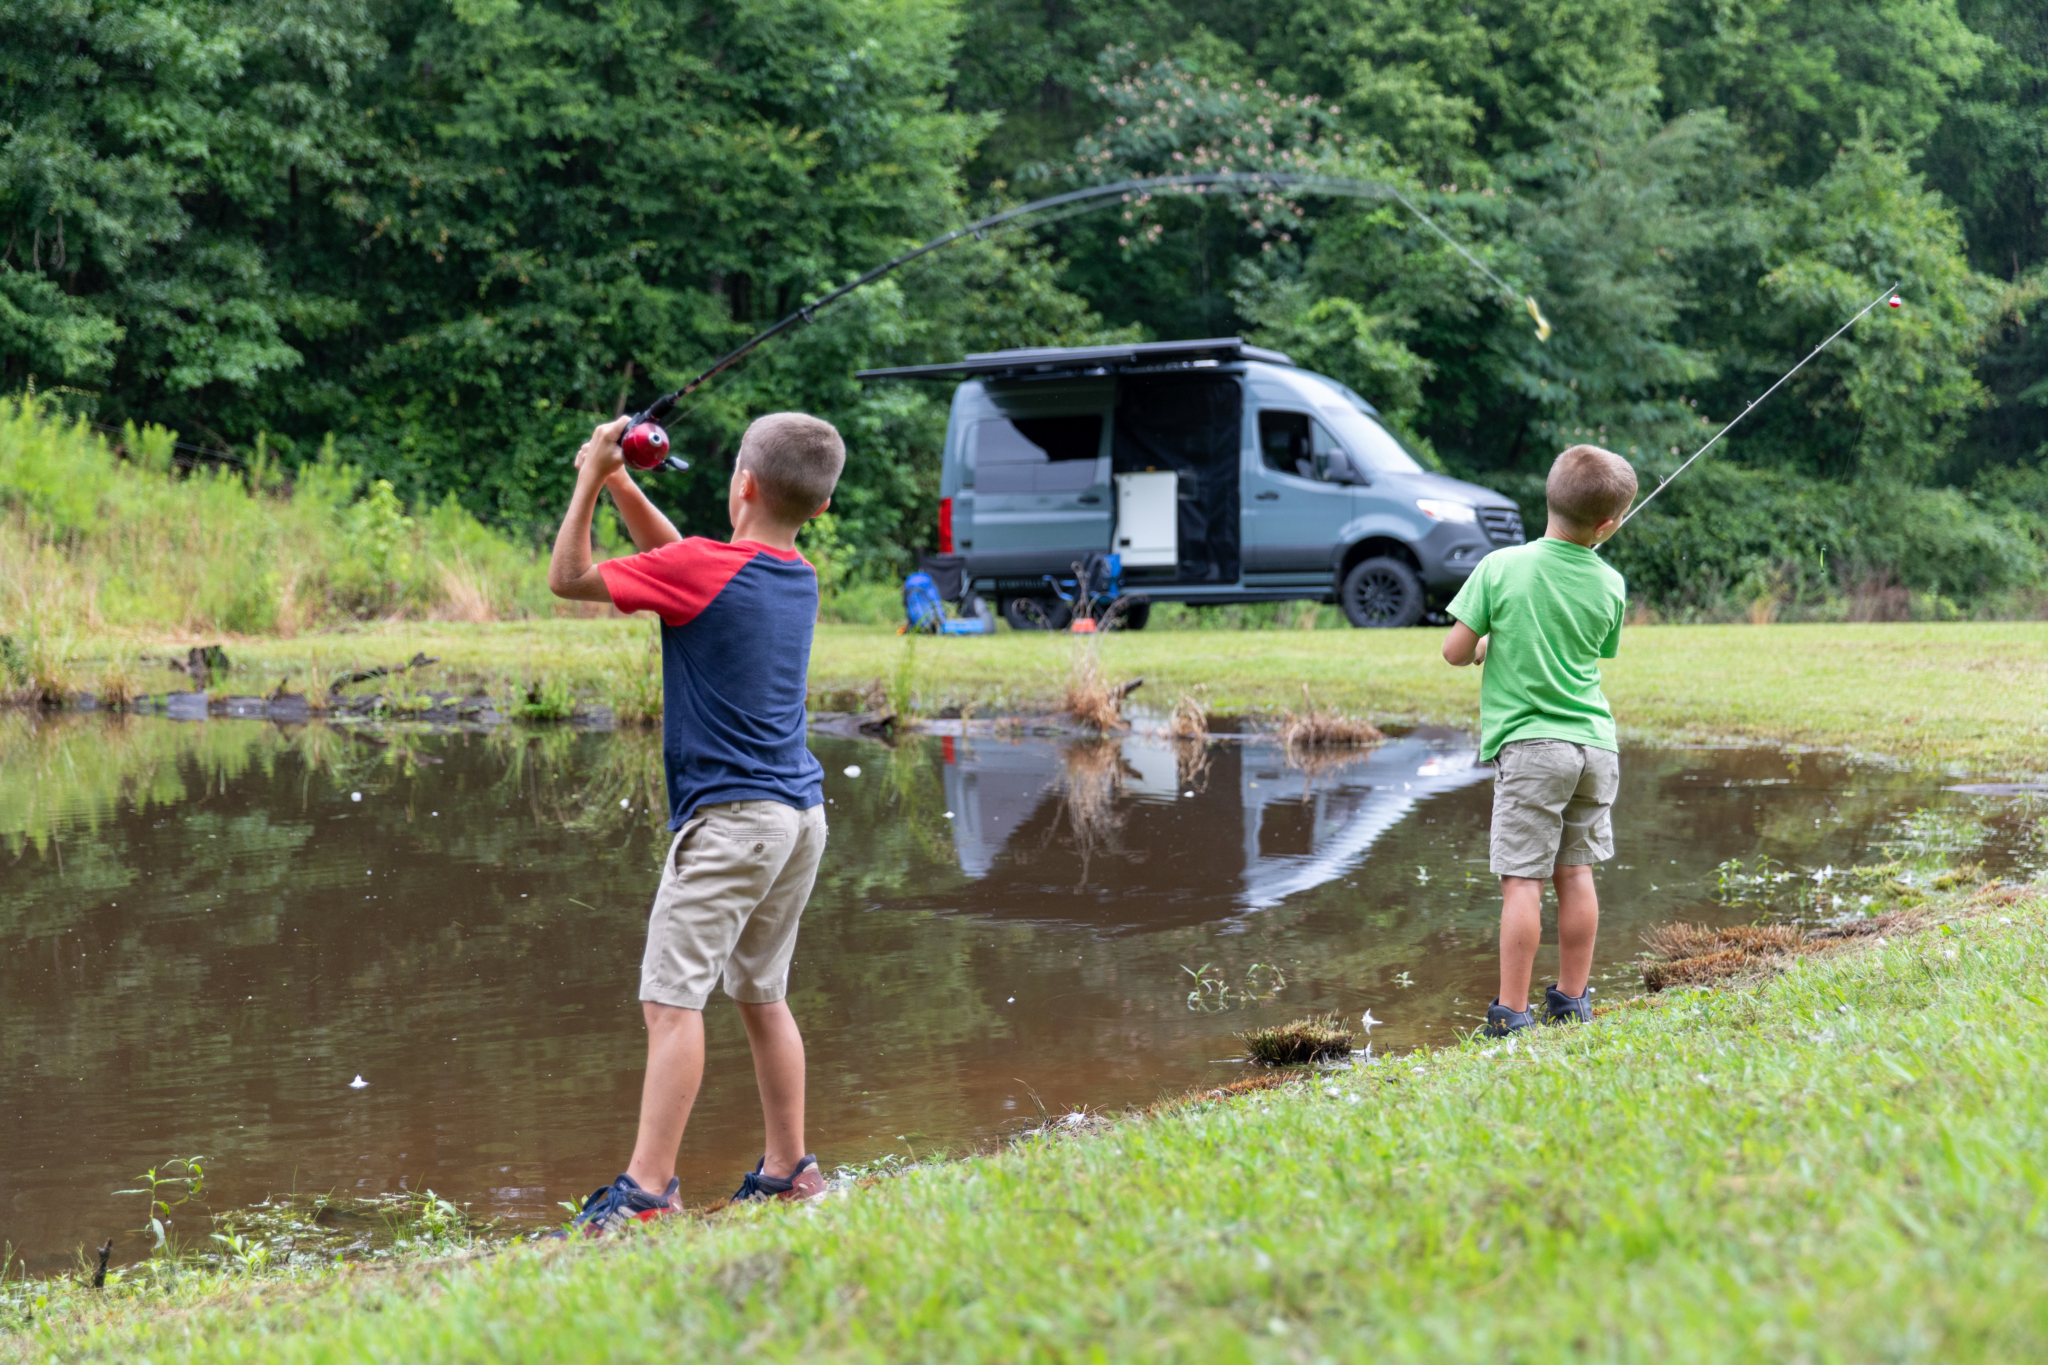 Mercedes Benz and Storyteller Overland 9 How to plan the perfect camping getaway in Birmingham